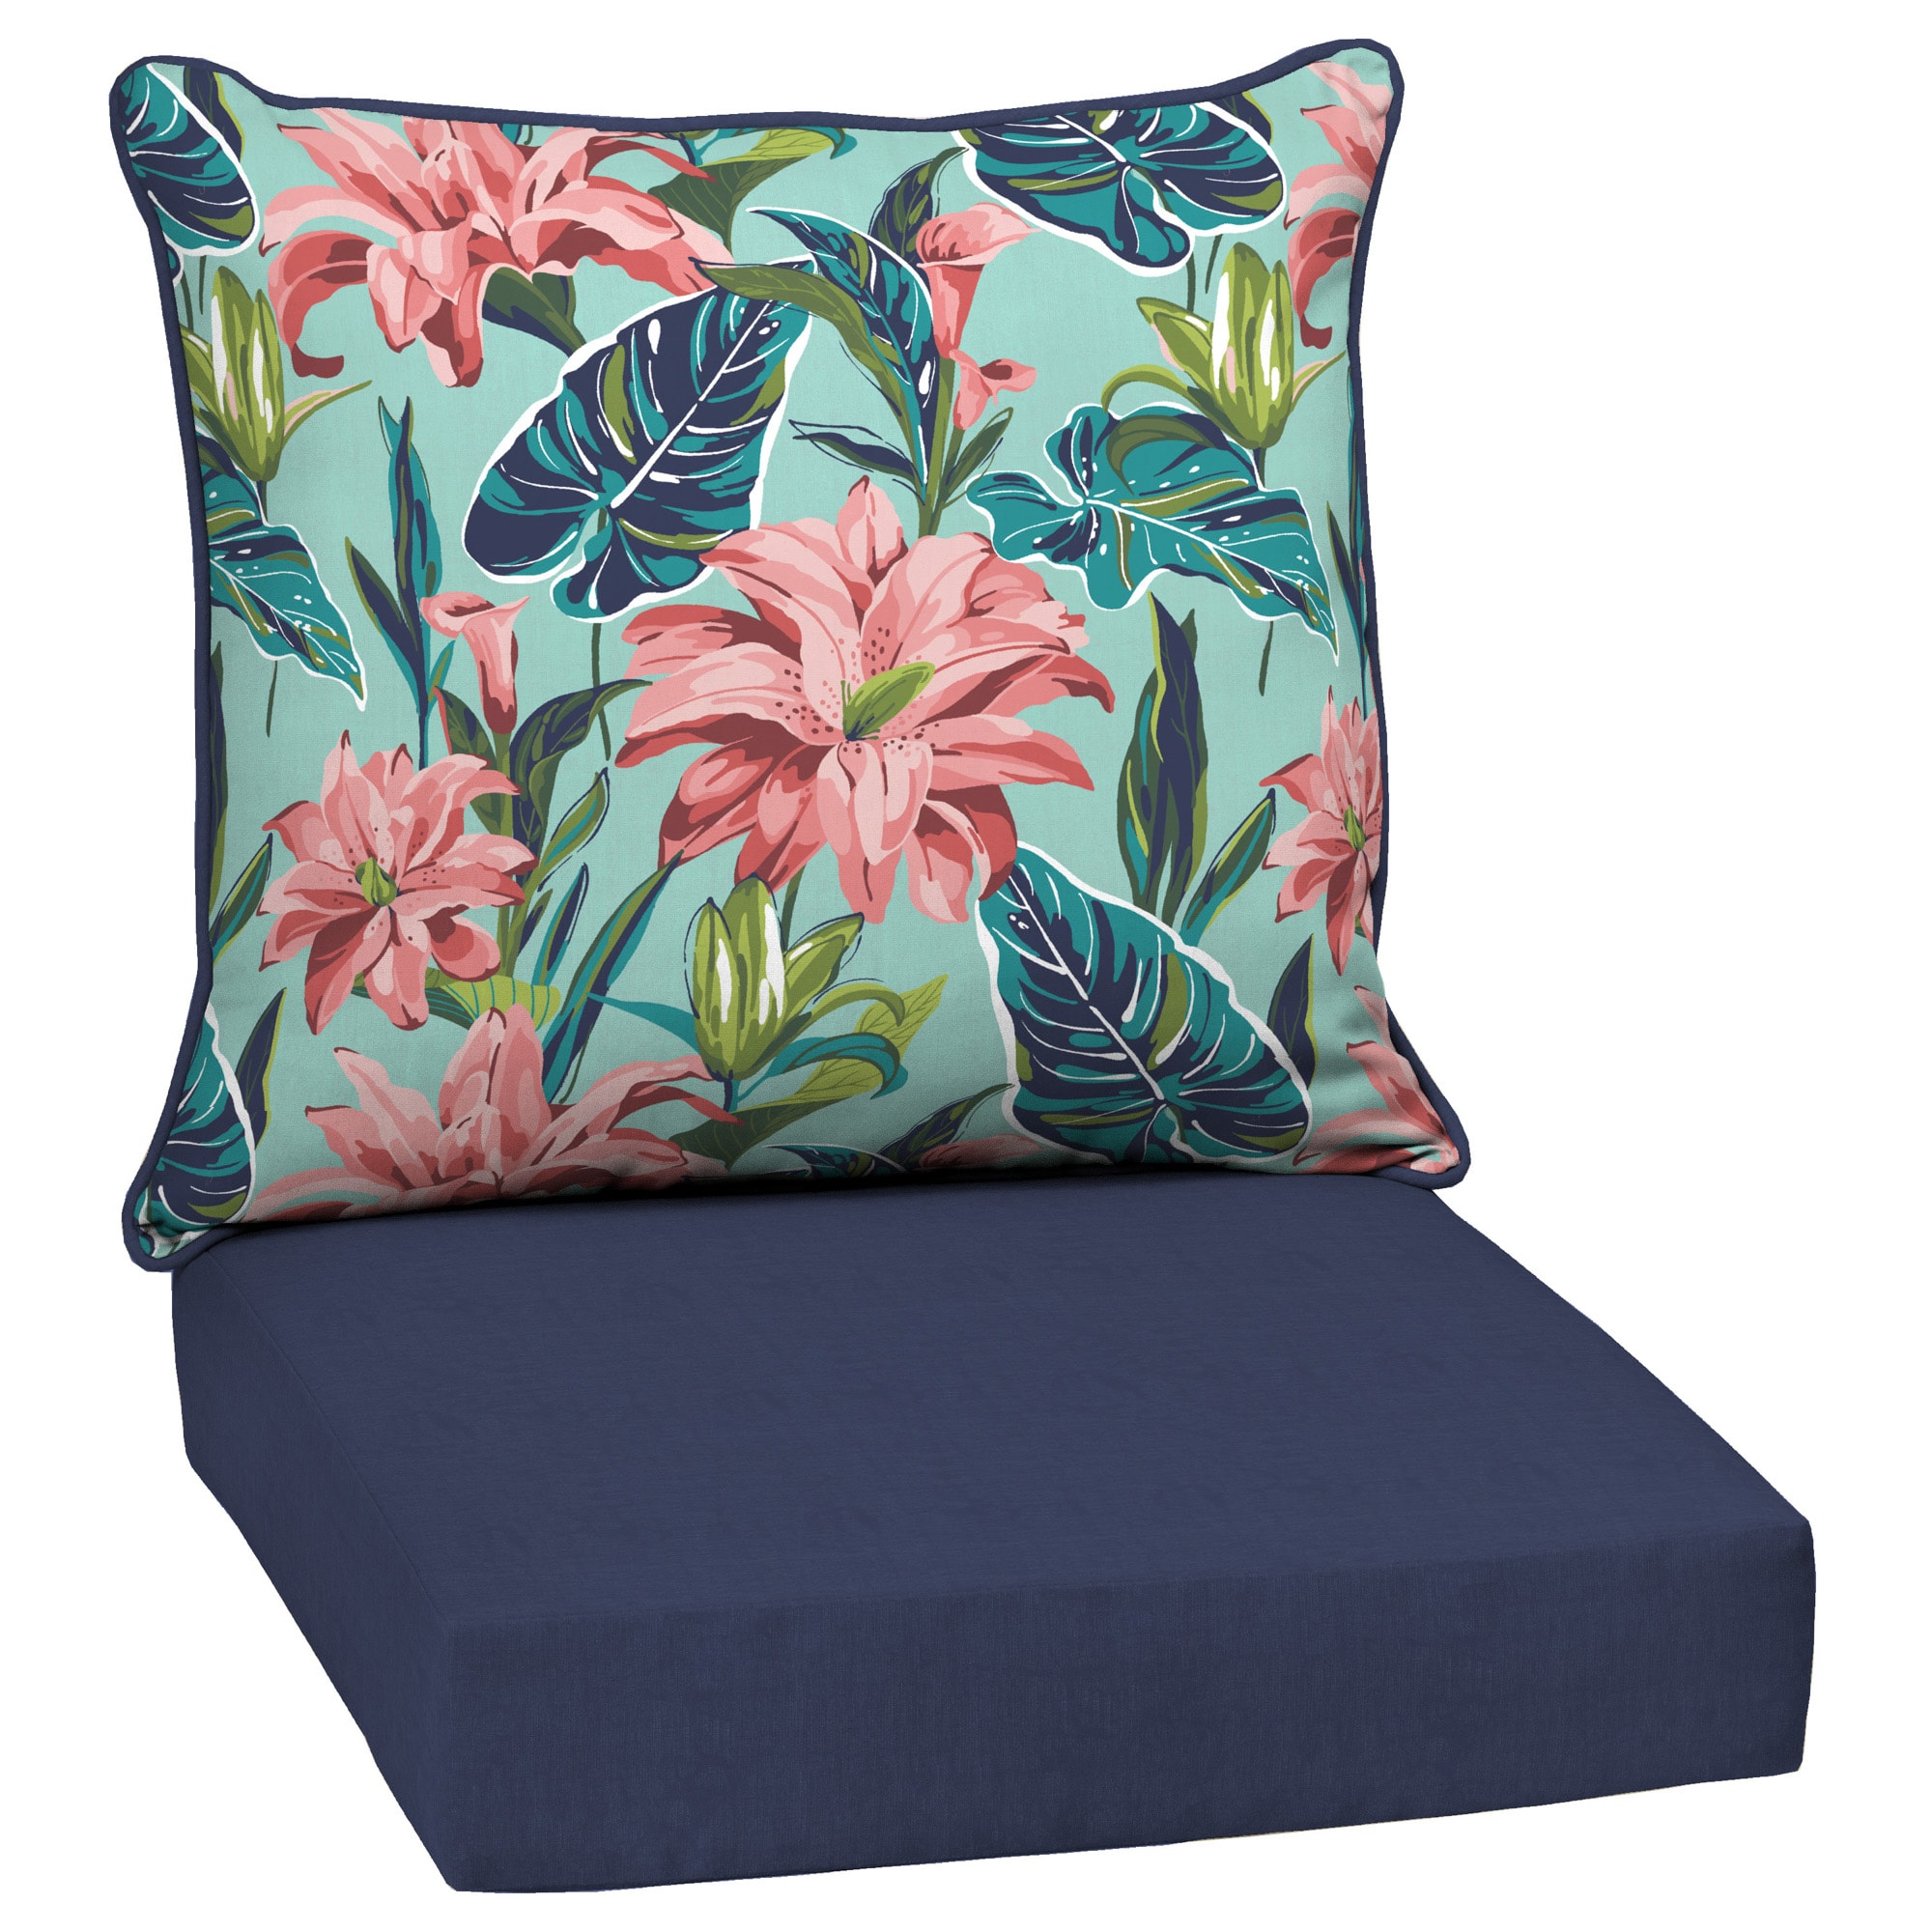 Seat Style Hana x in 24-in at Patio Selections Cushion Tropical Cushions Blue department 24-in the Deep Furniture Patio Chair